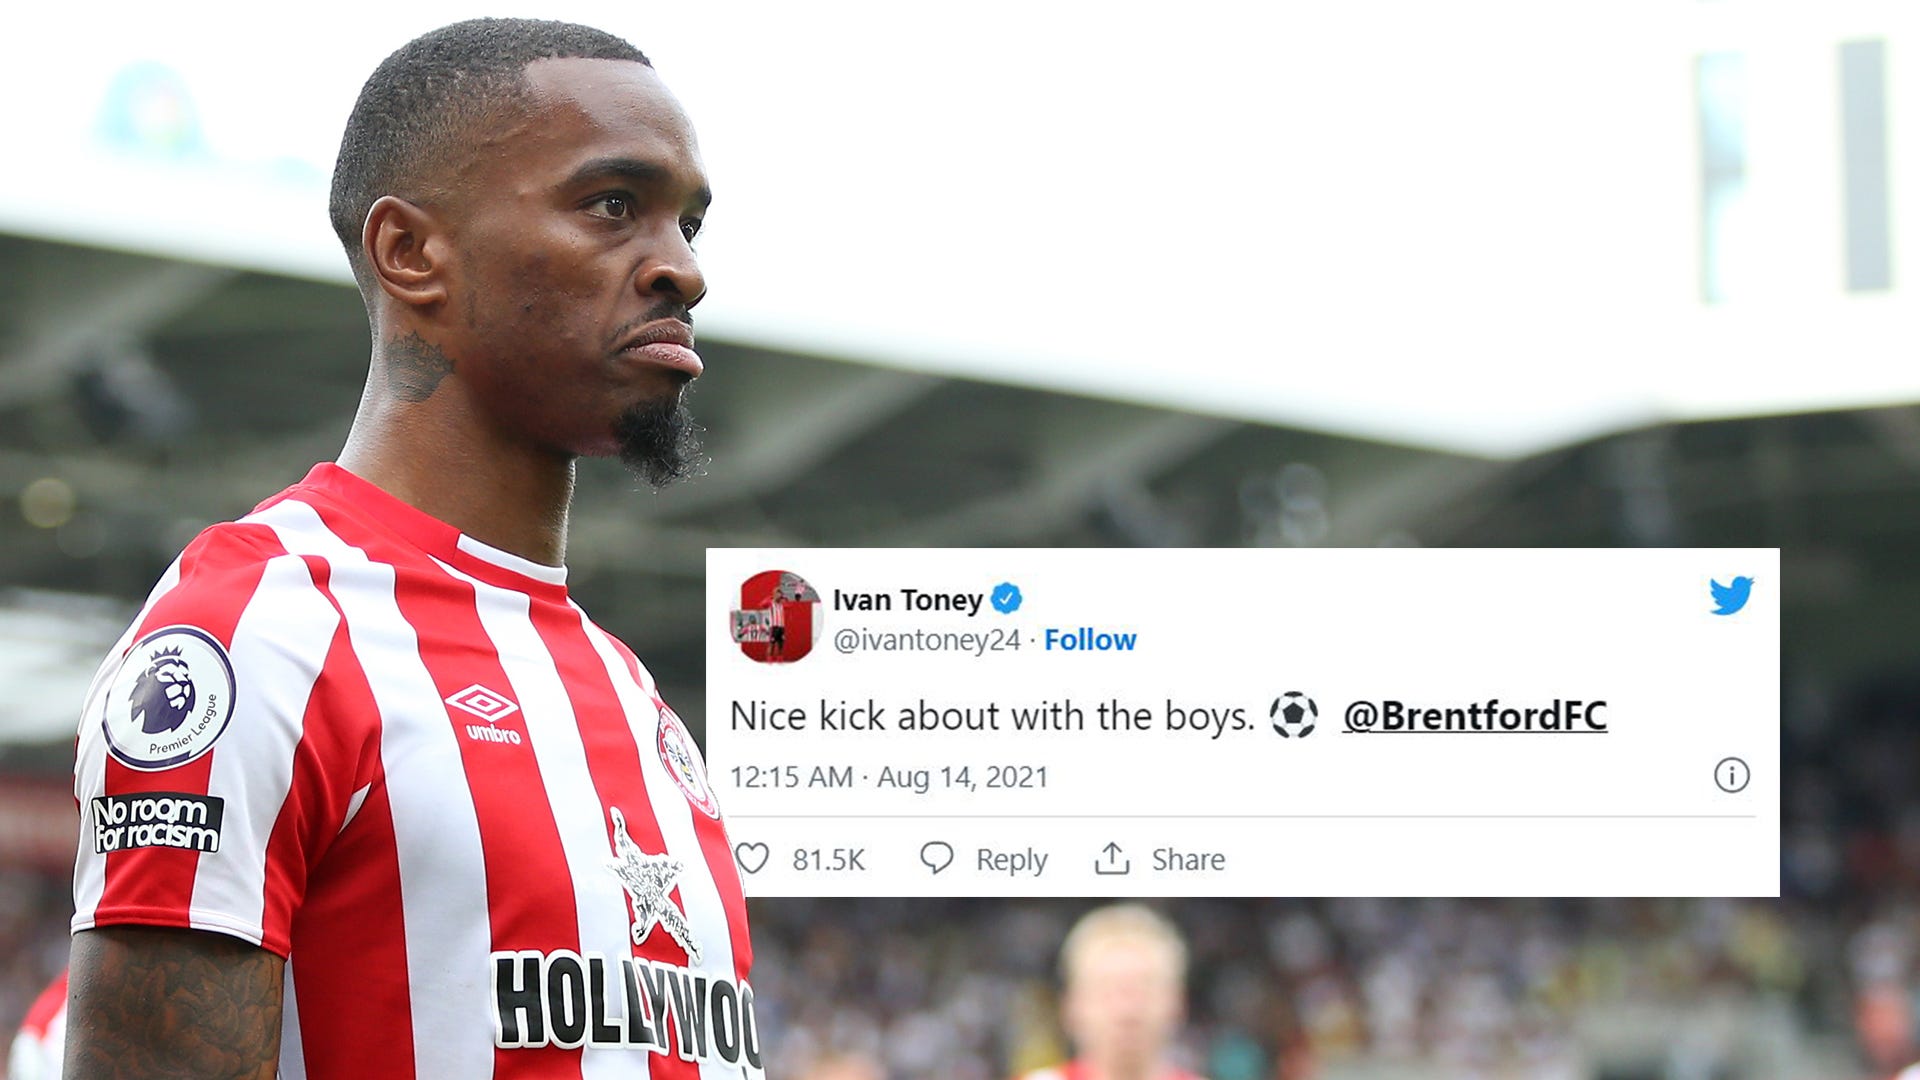  Ivan Toney, a Brentford player, posted a picture of himself playing a match on Twitter and tagged the club's official account, along with a caption saying "Nice kick about with the boys".